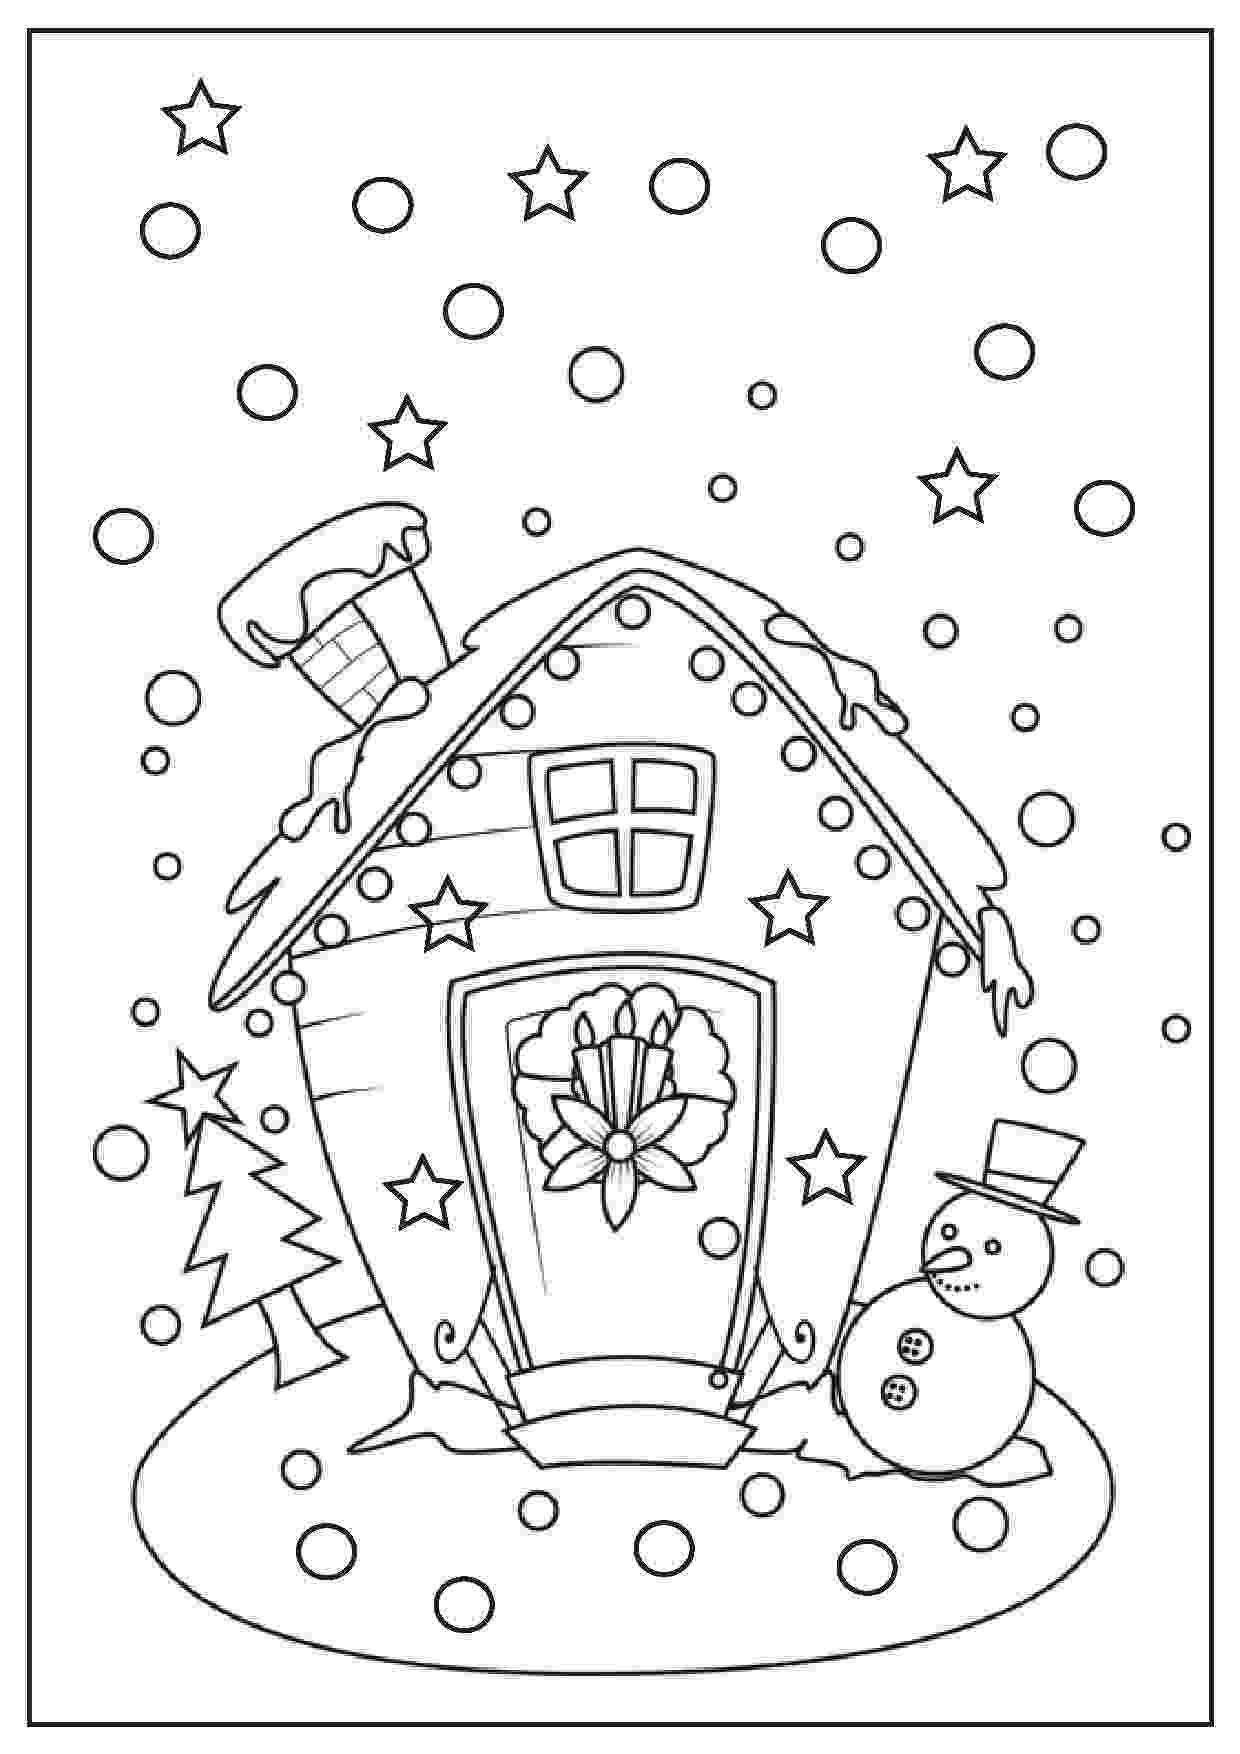 christmas coloring pages to print free free christmas coloring pages to print wallpapers9 print to christmas coloring pages free 